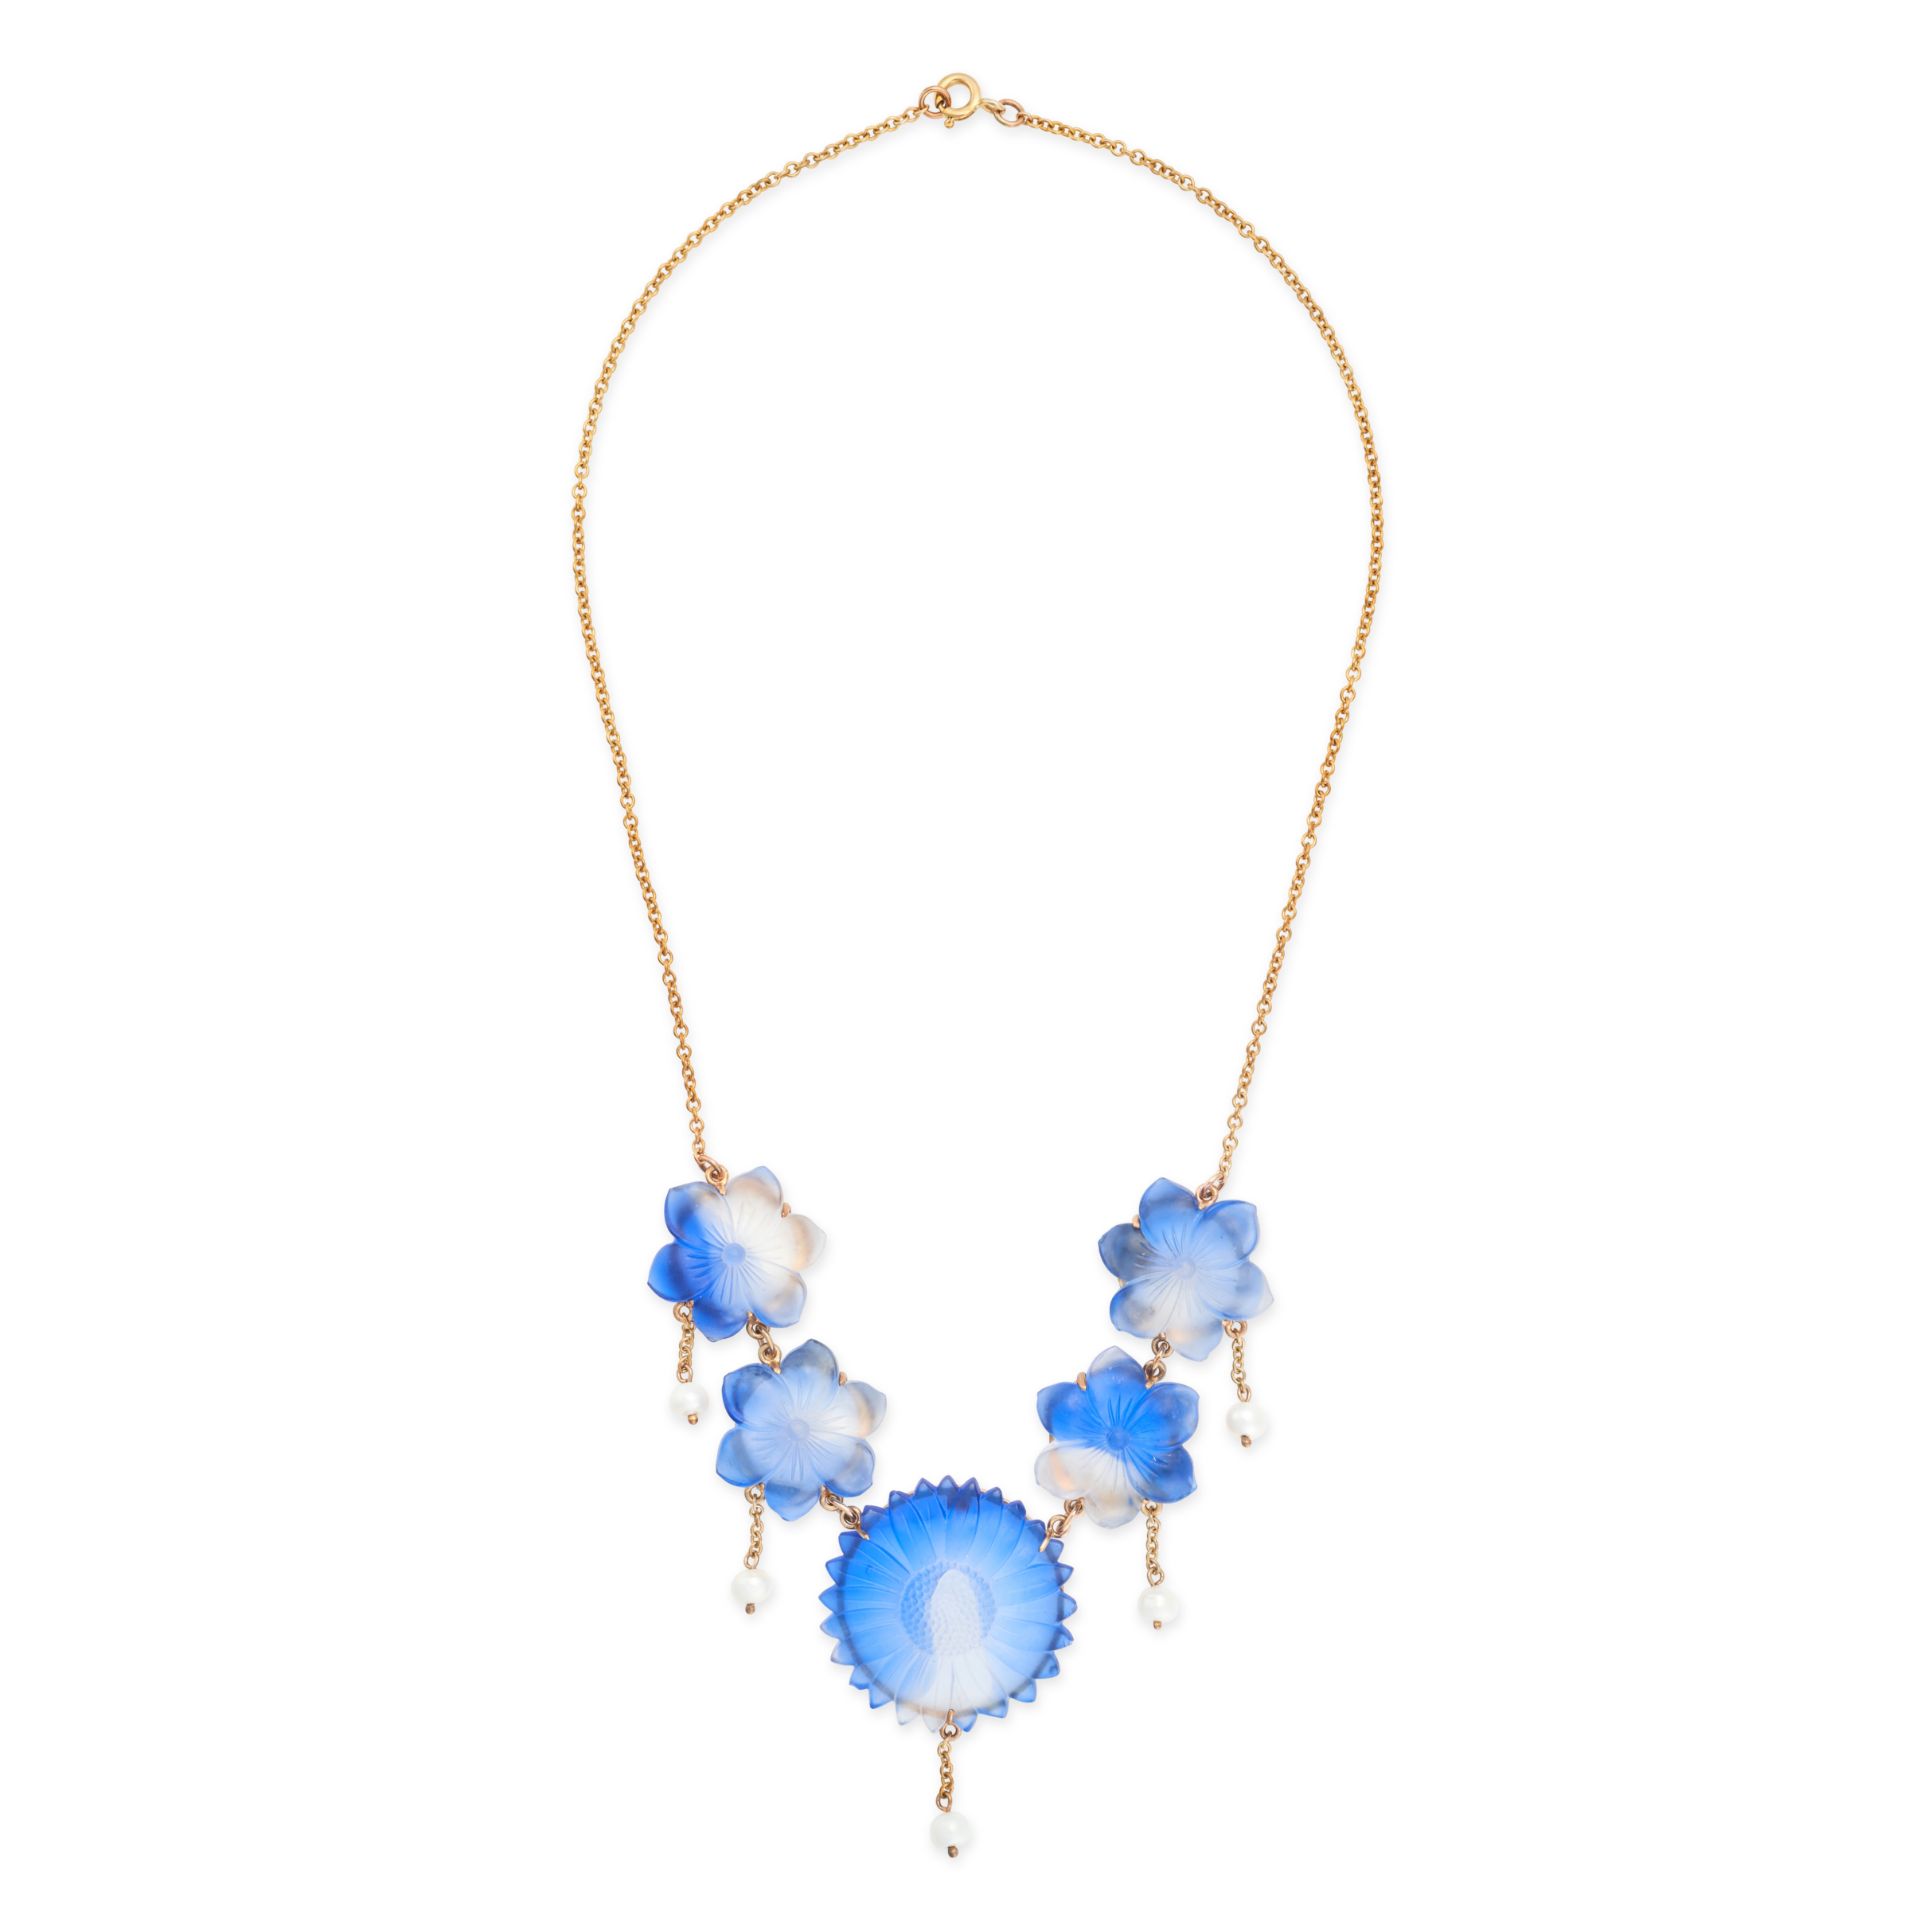 NO RESERVE - A BLUE GLASS AND PEARL FLOWER NECKLACE comprising a row of five flowers moulded from... - Image 2 of 2